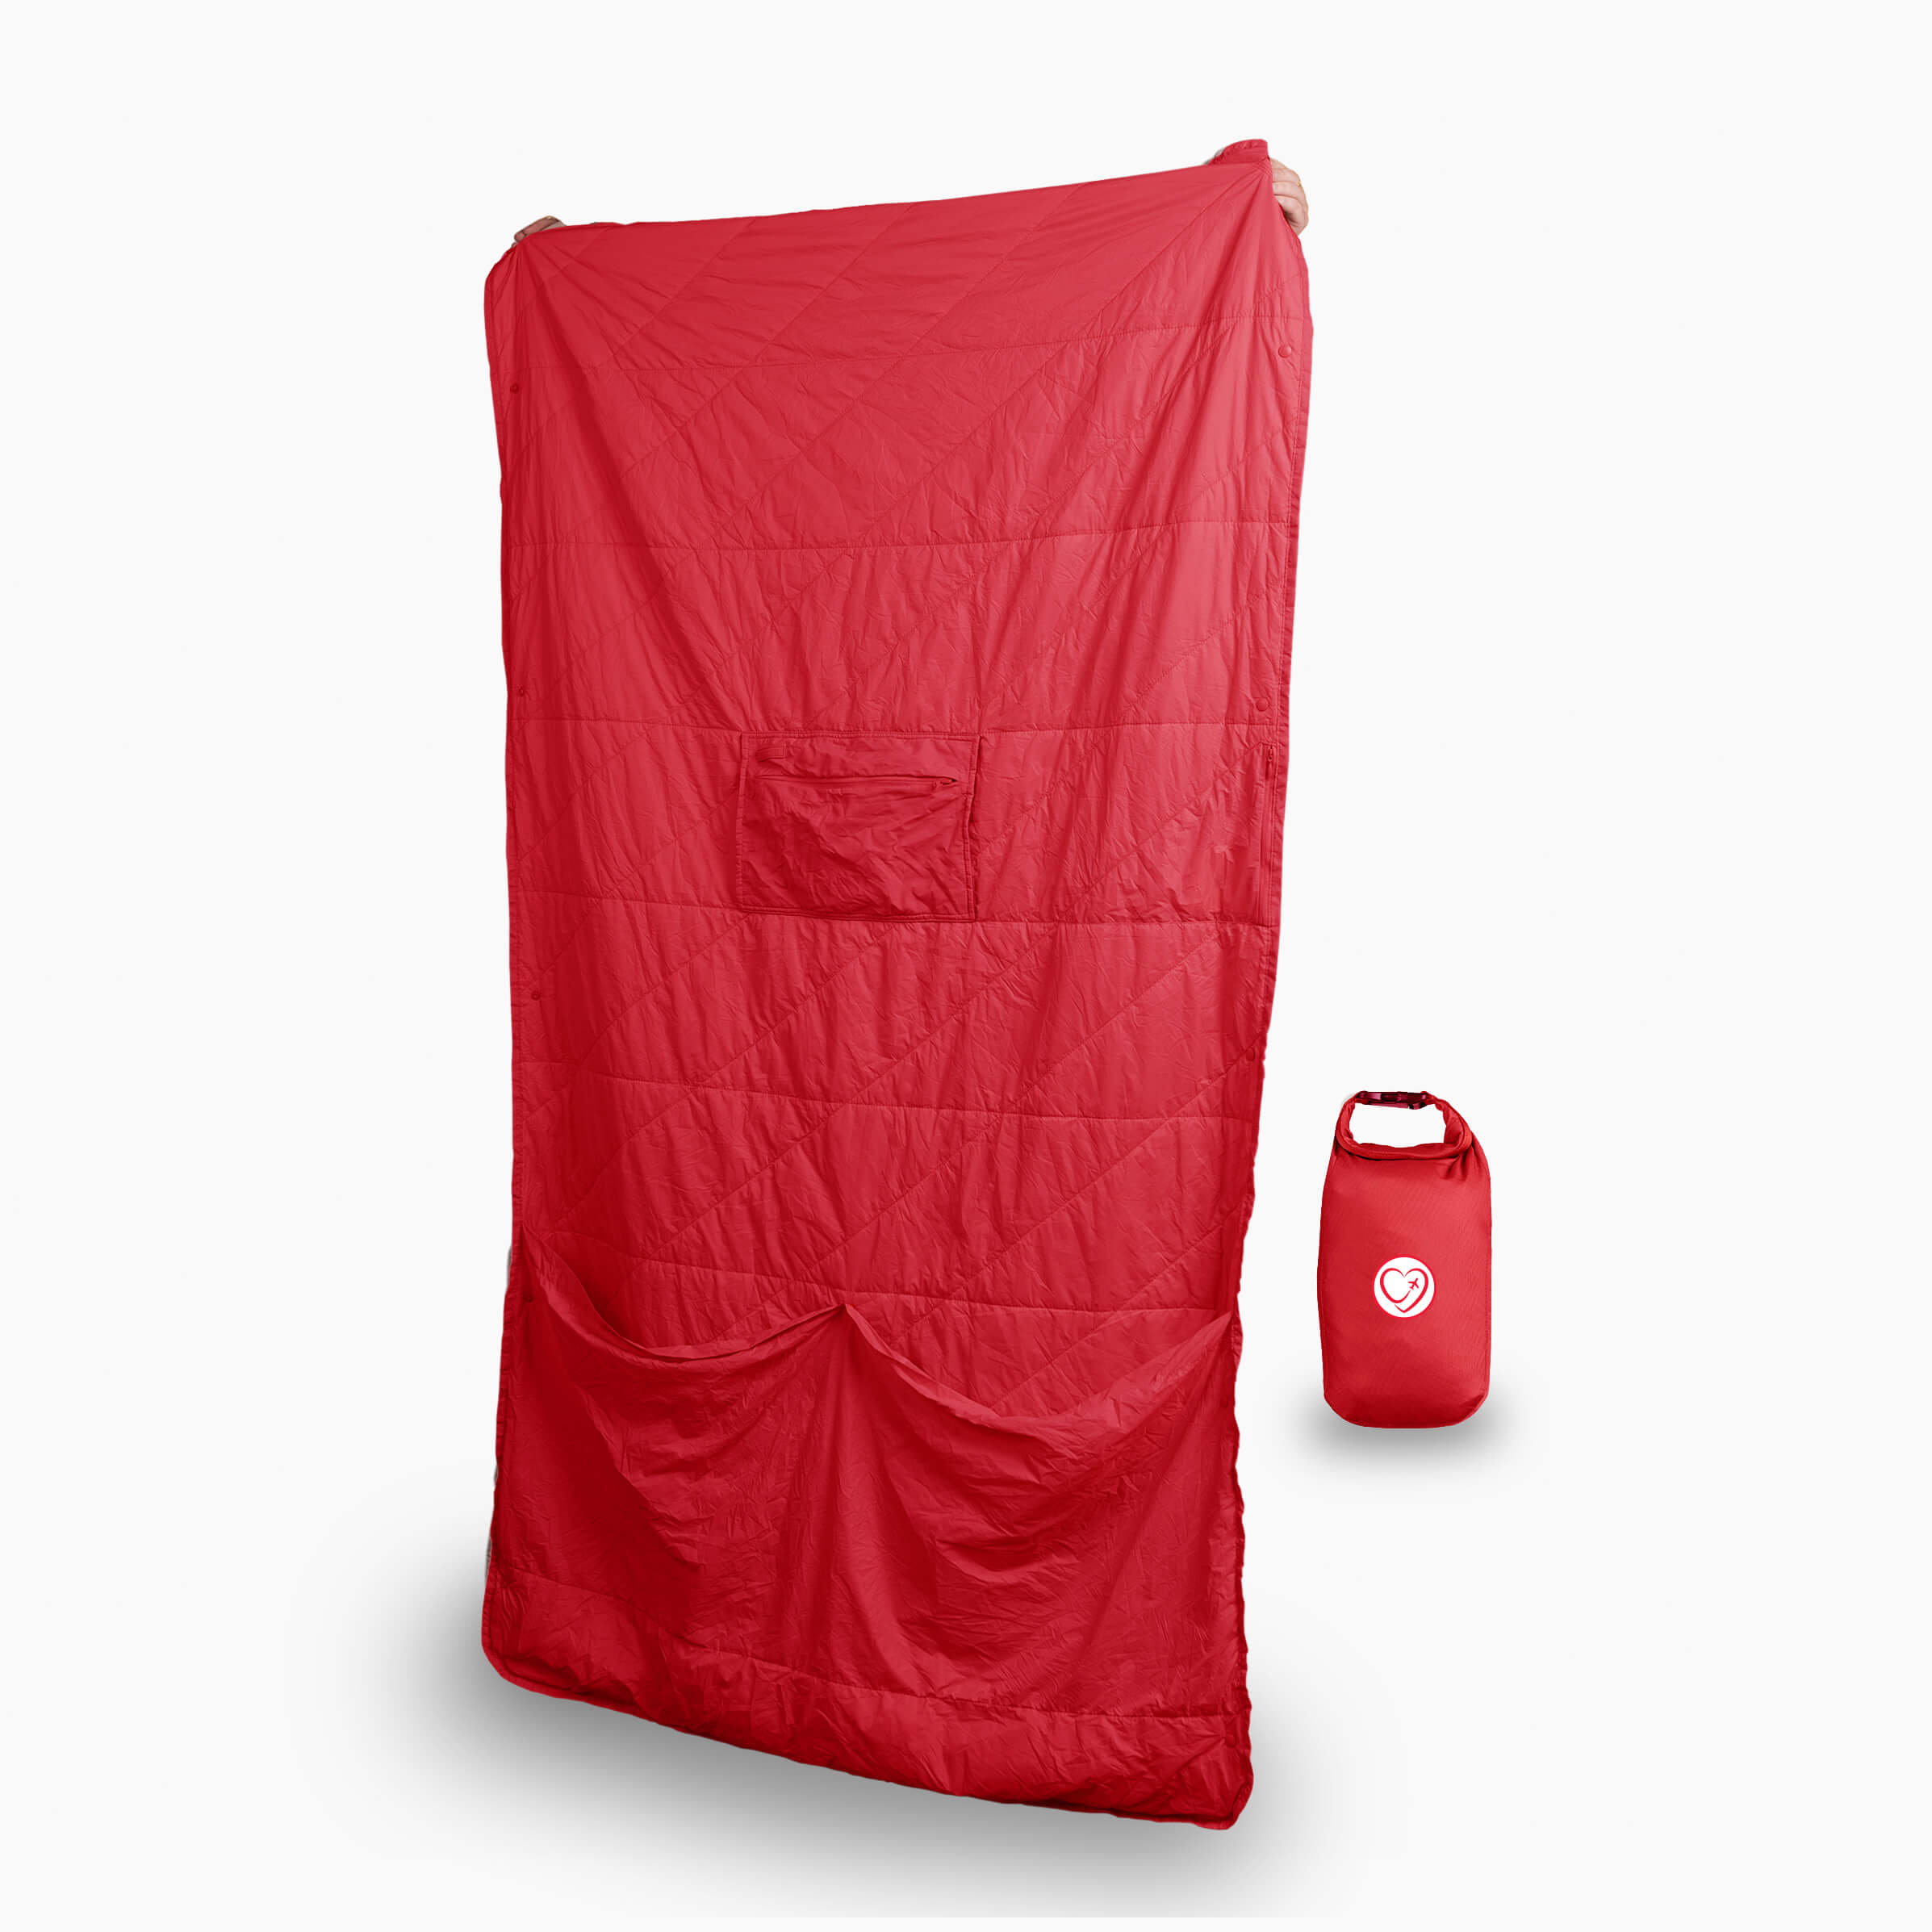 GRAVEL x Girls Love Travel Layover™ Travel Blanket - Insulated & Packable | Red